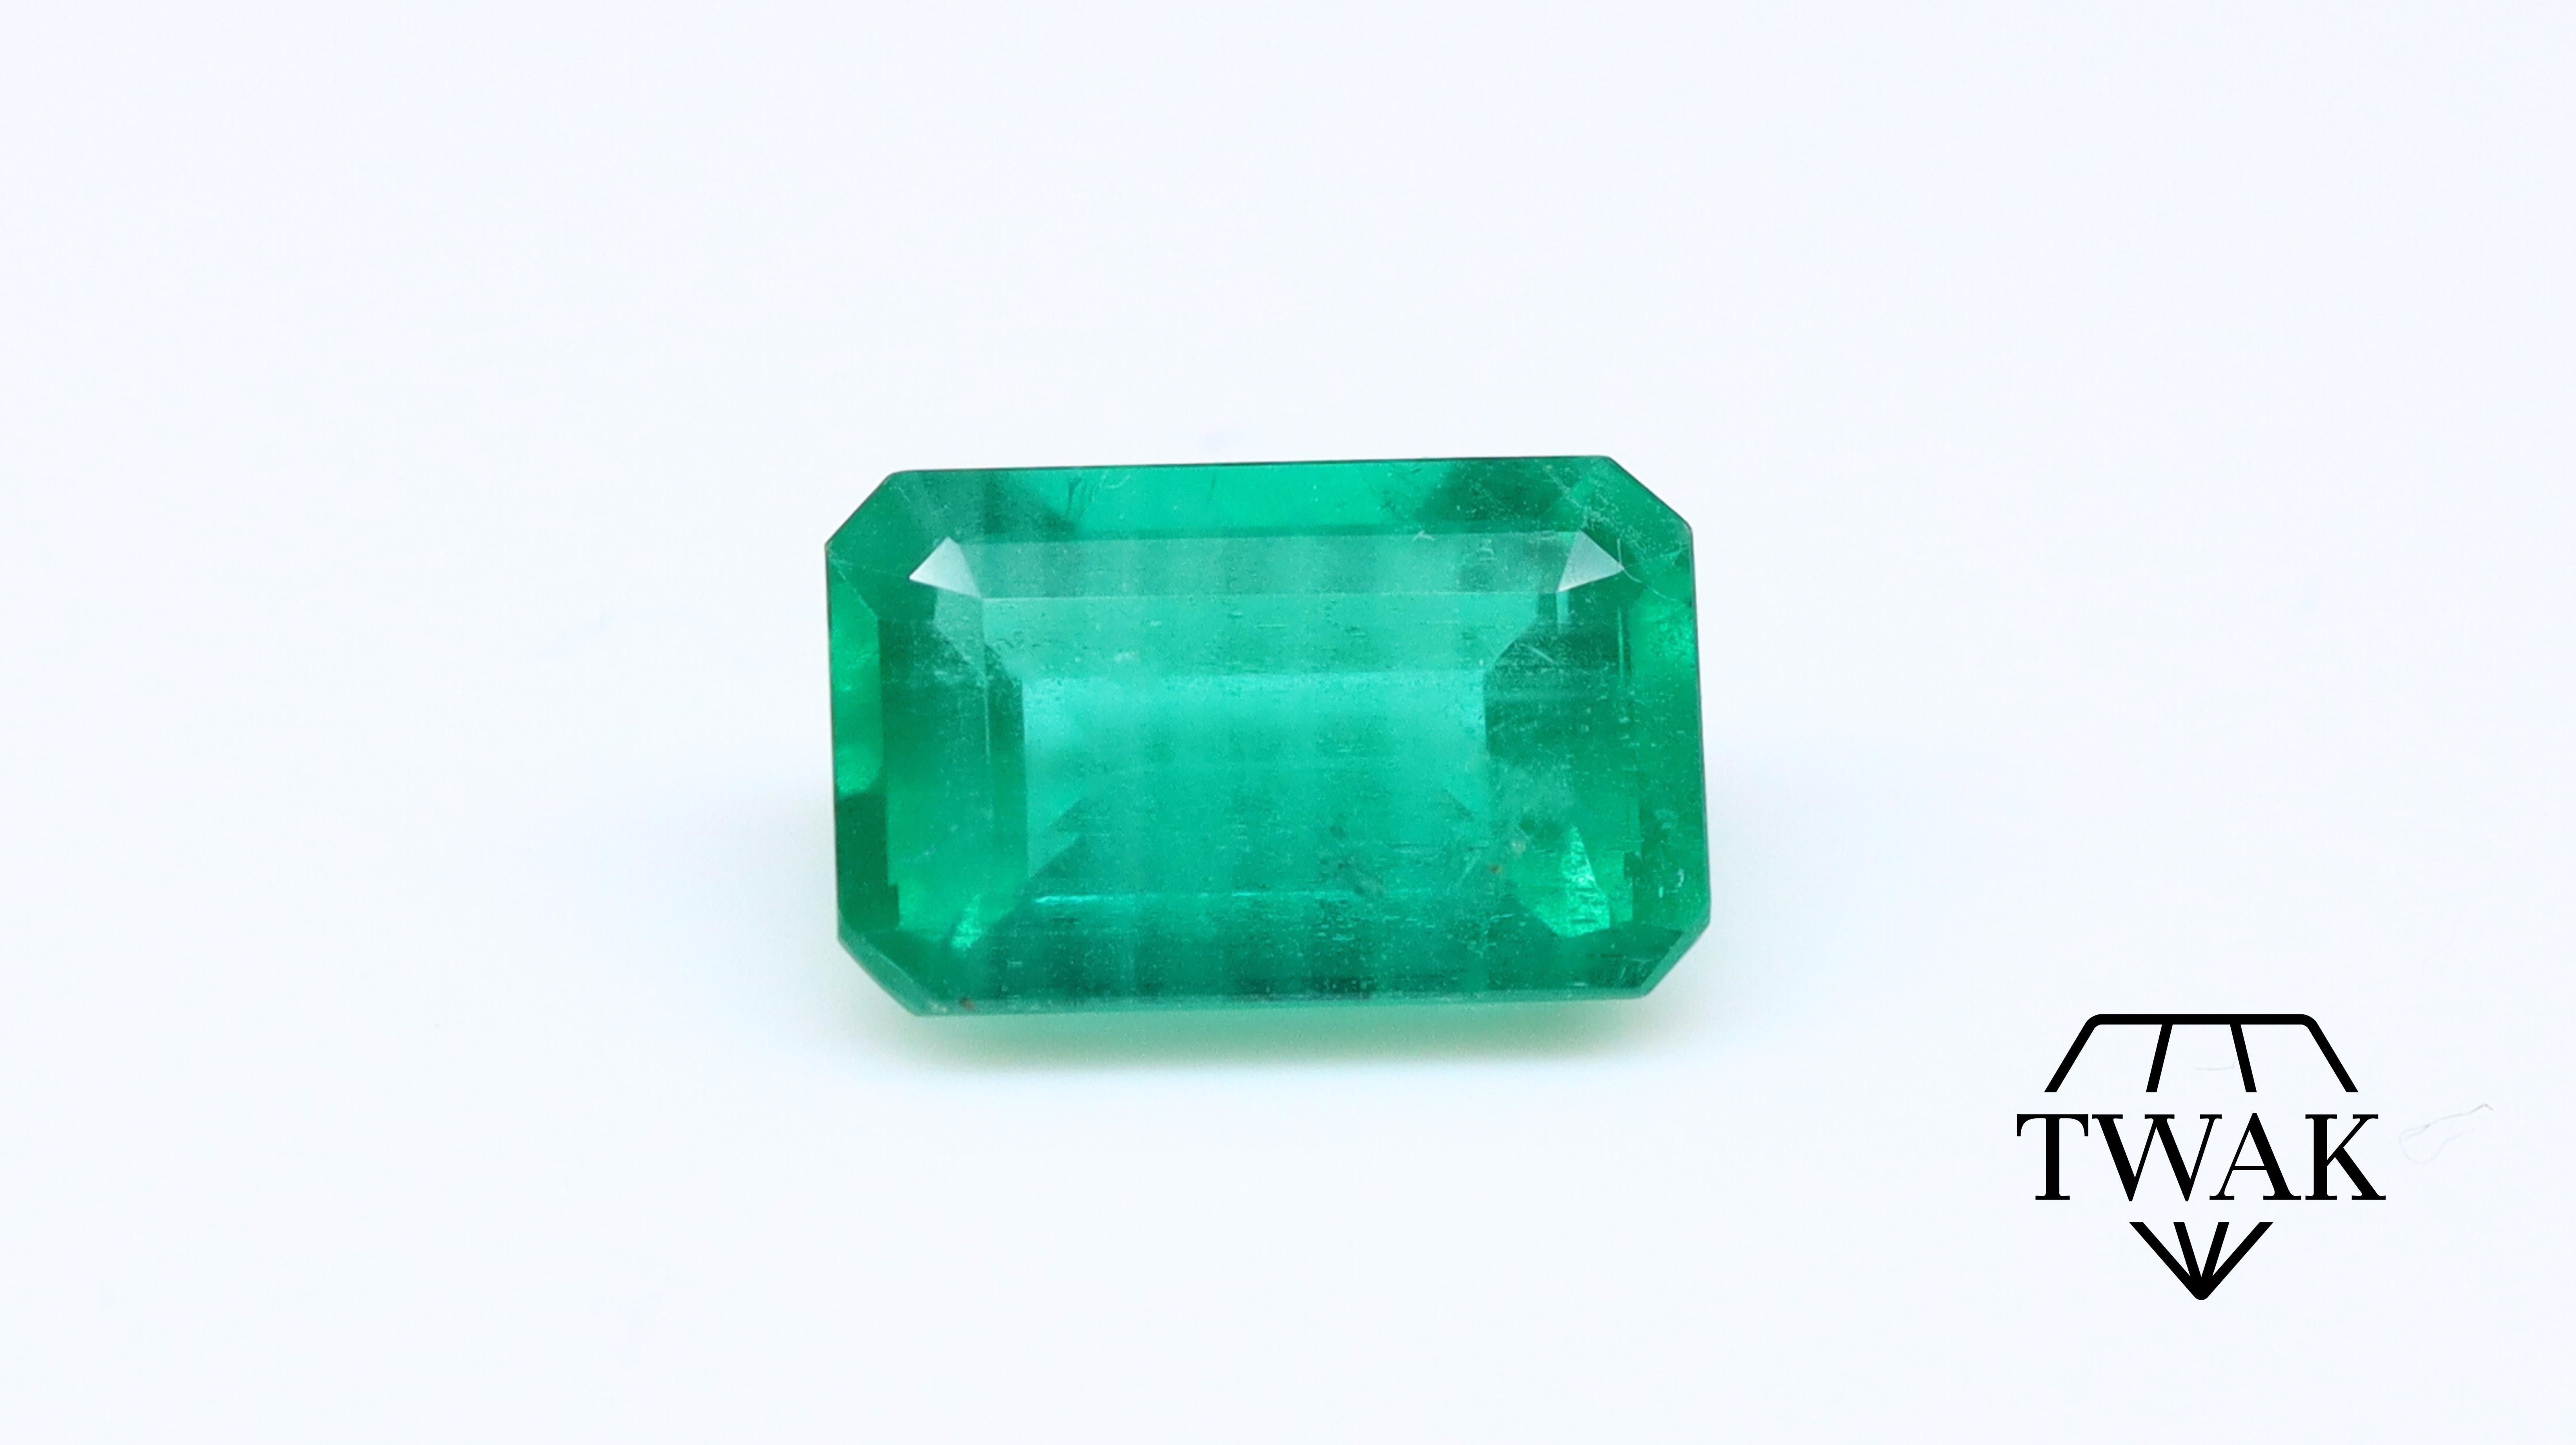 A beautiful Emerald with excellent color, crystal, and saturation.

Details and description:
Dimensions: 7.92 x 5.01 x 3.70mm
Weight: 1.09ct
Color:  Green 
Treatment: Oil

Emeralds are naturally porous and inclusive stones, with surface reaching